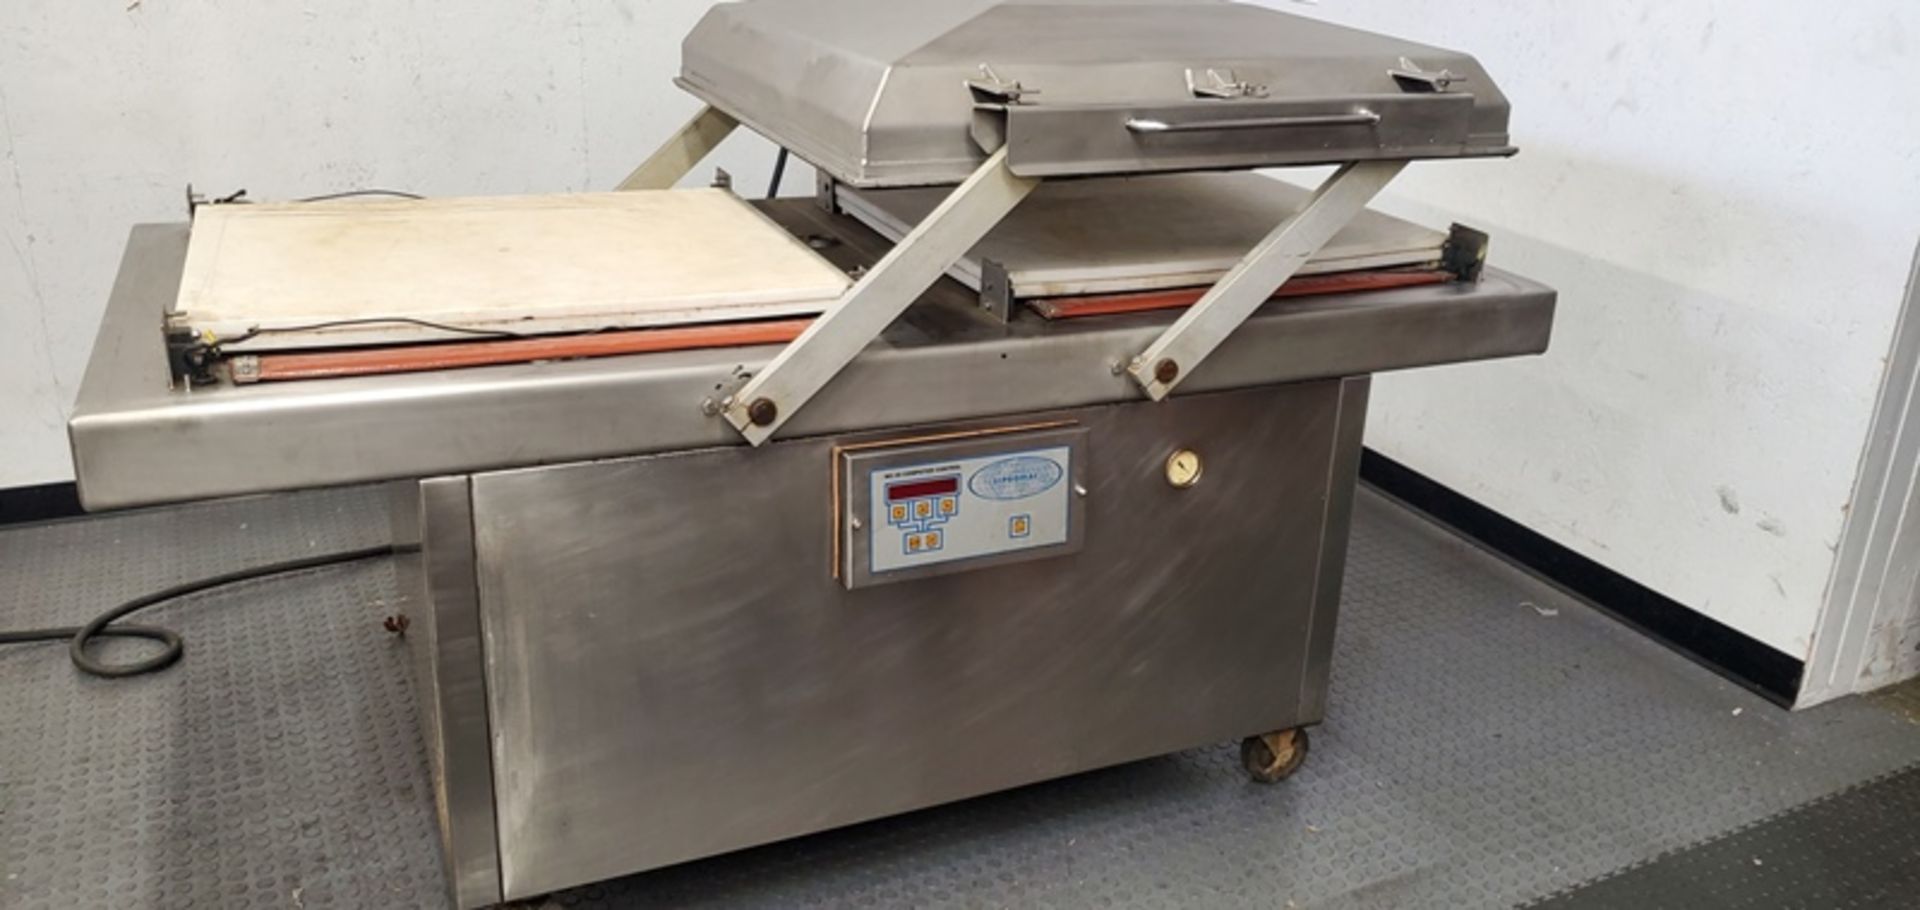 Sipromac Mdl. 650A Double Chamber Vacuum Packaging Machine, Ser. #02353, 208V/3PH/60Hz, missing some